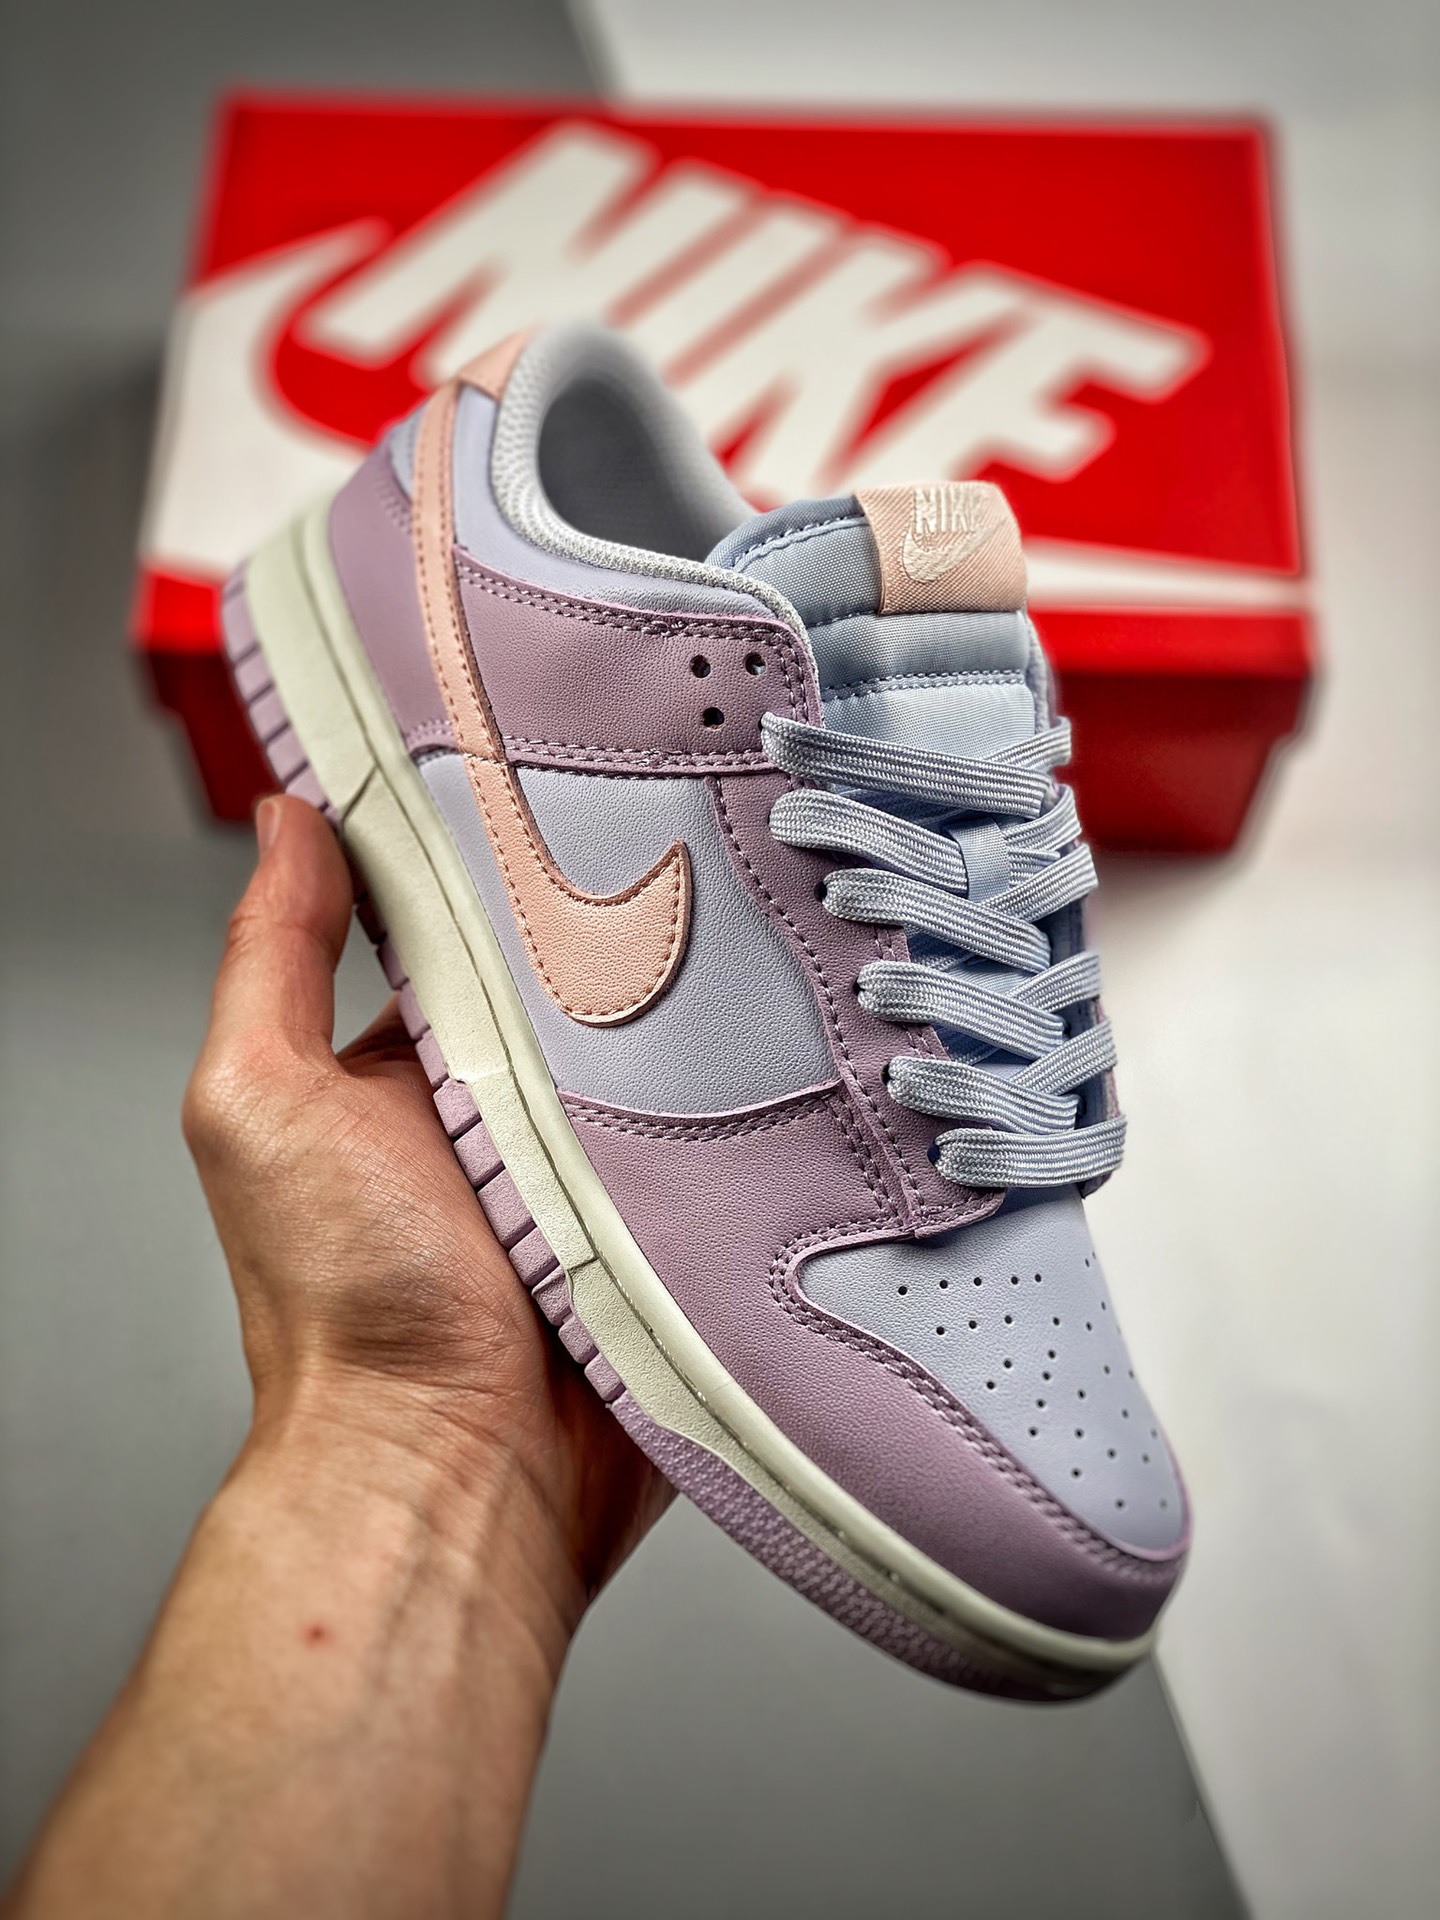 Nike Dunk Low "Easter" Blue/Purple-Pink DD1503-001 Shoes